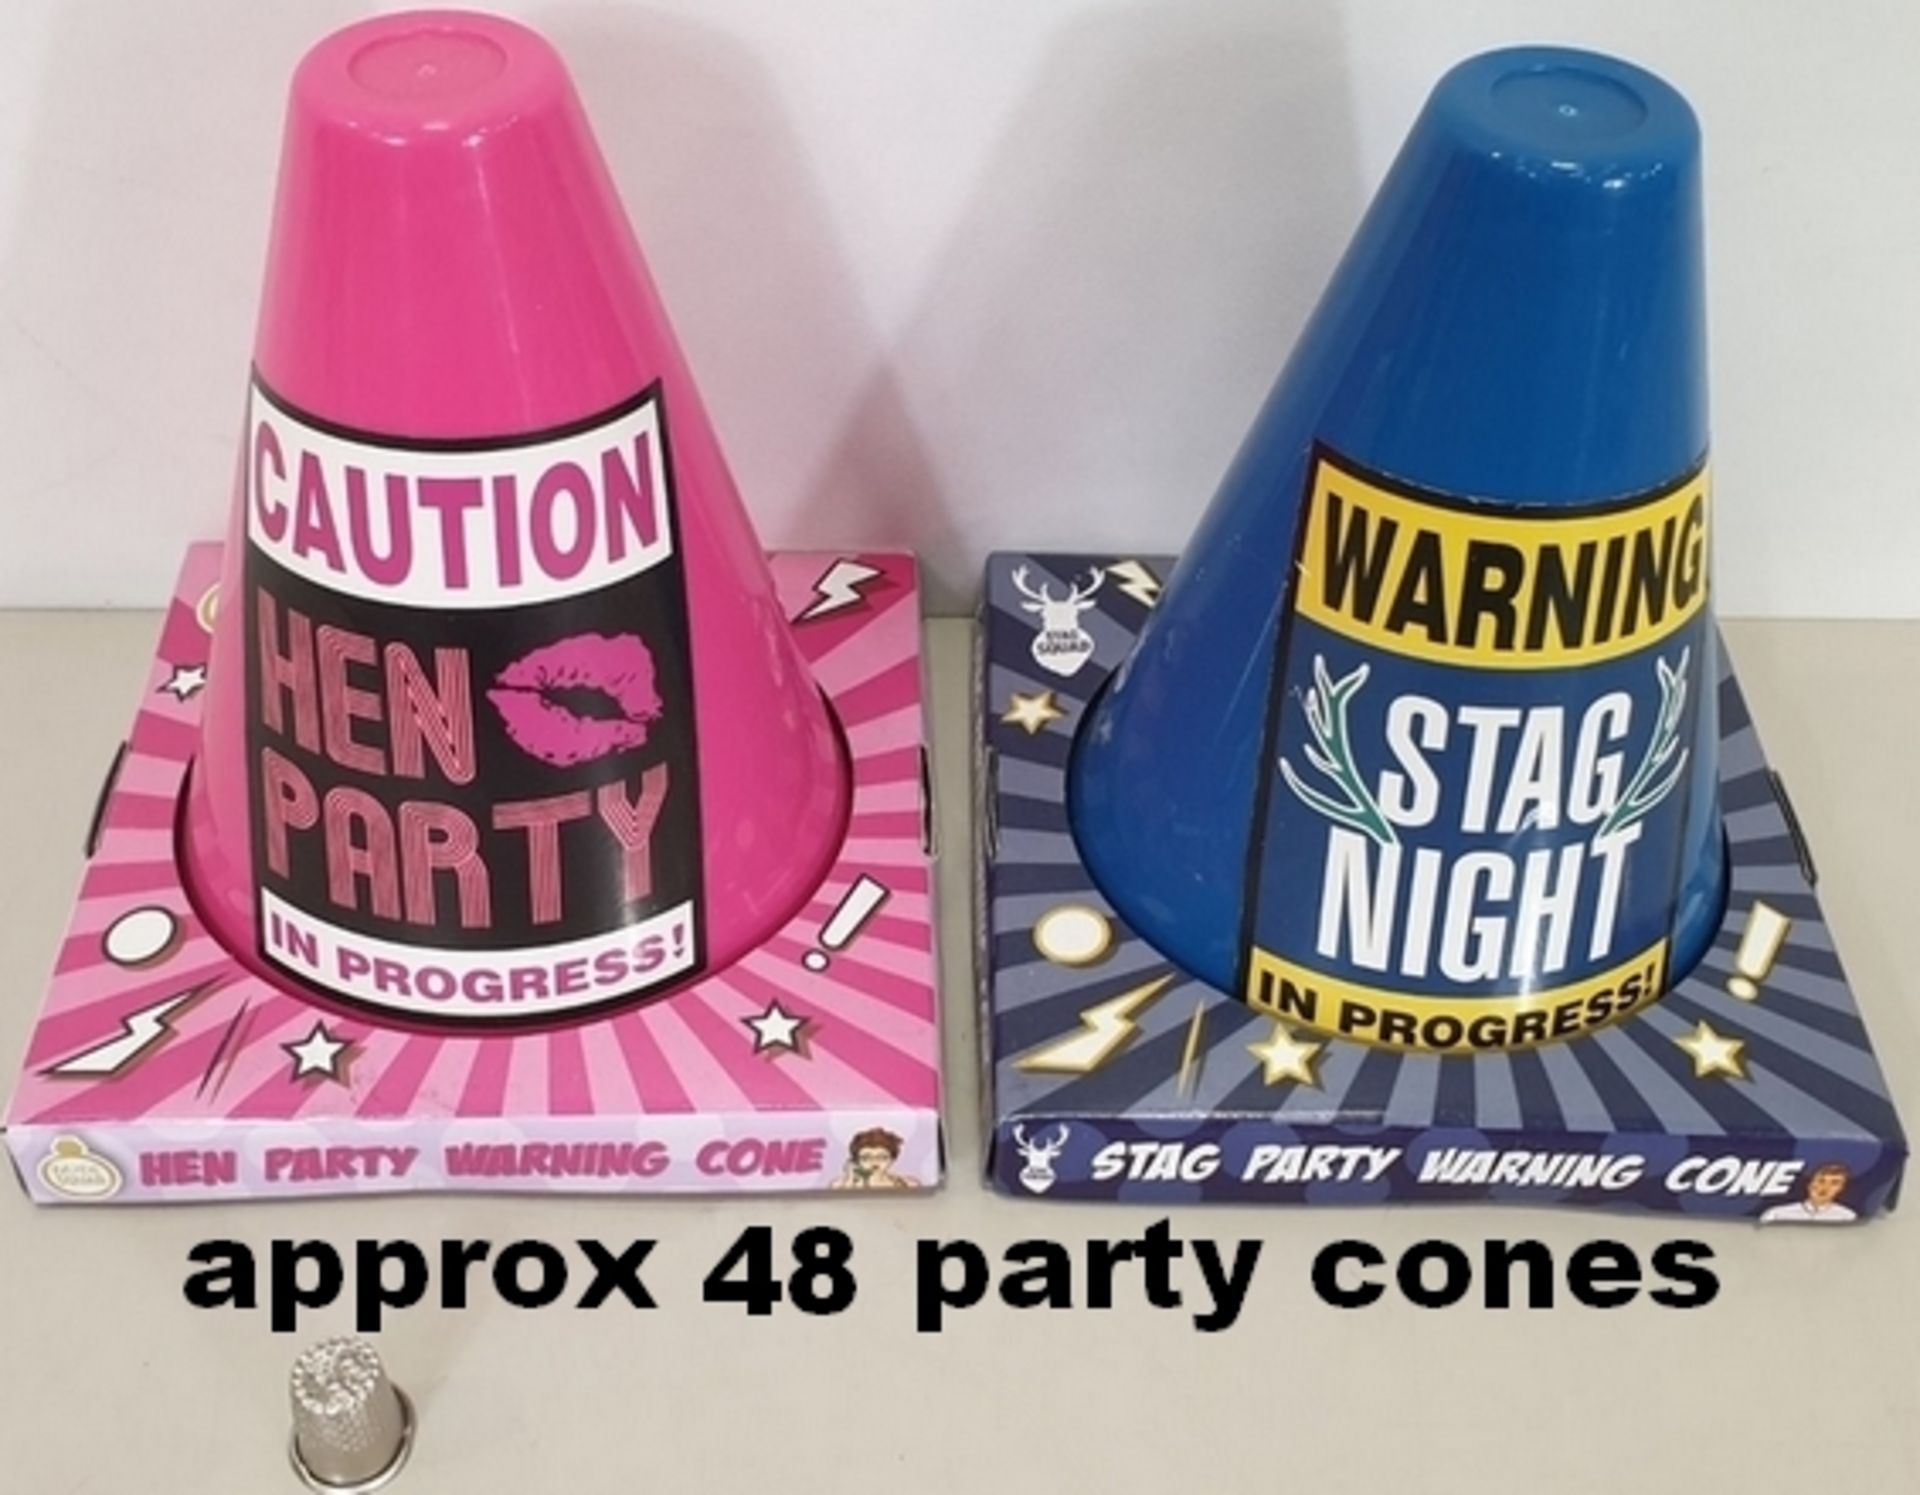 48 Party Cones These Can be Used For Other Occasions Like Laying Out A Path For Children To Ride